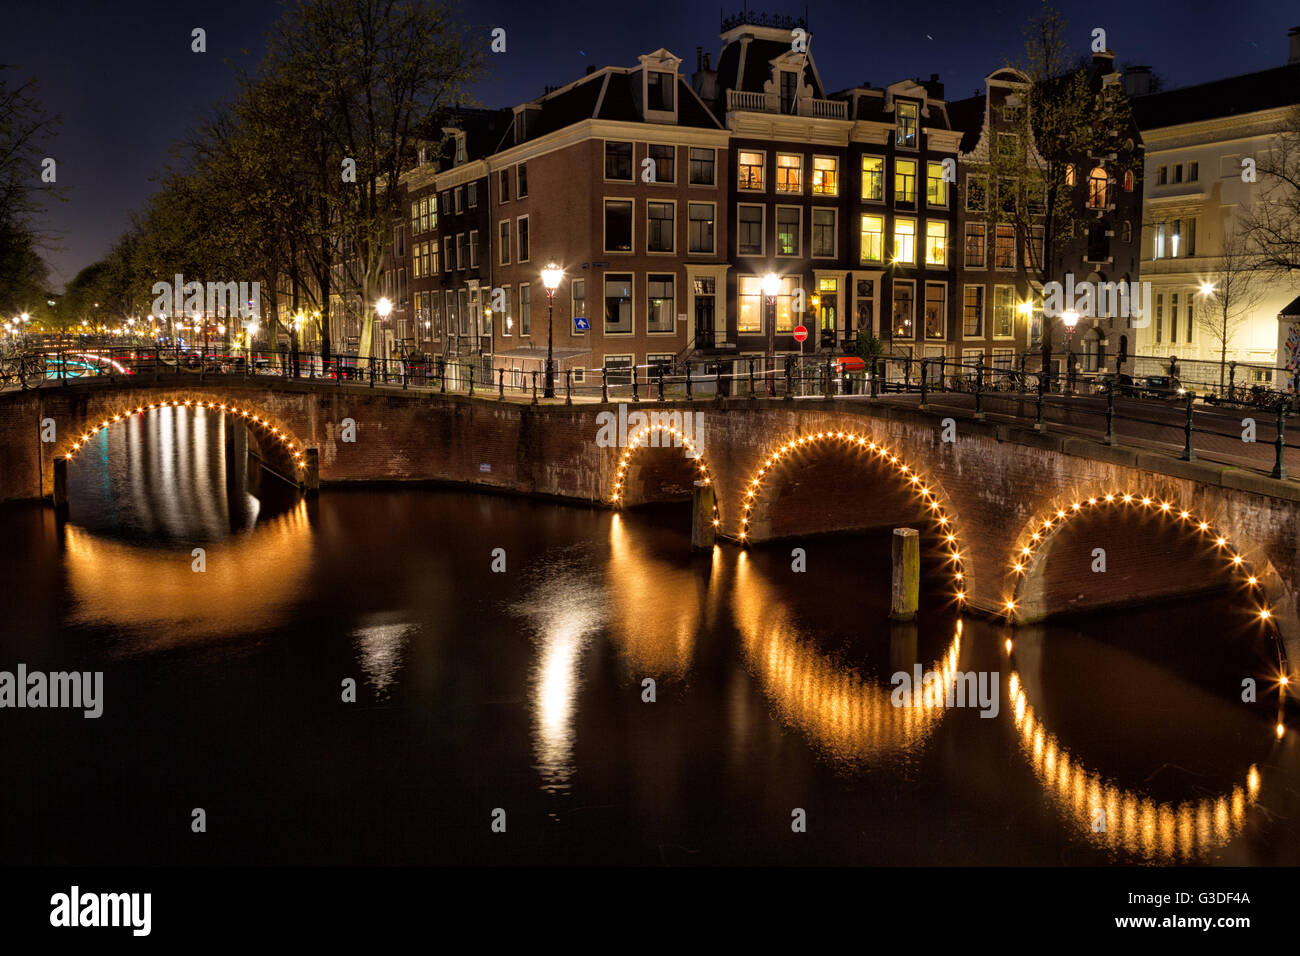 Night shot of the corner of Keizersgracht and Leidsegracht in Amsterdam, Netherlands. Stock Photo